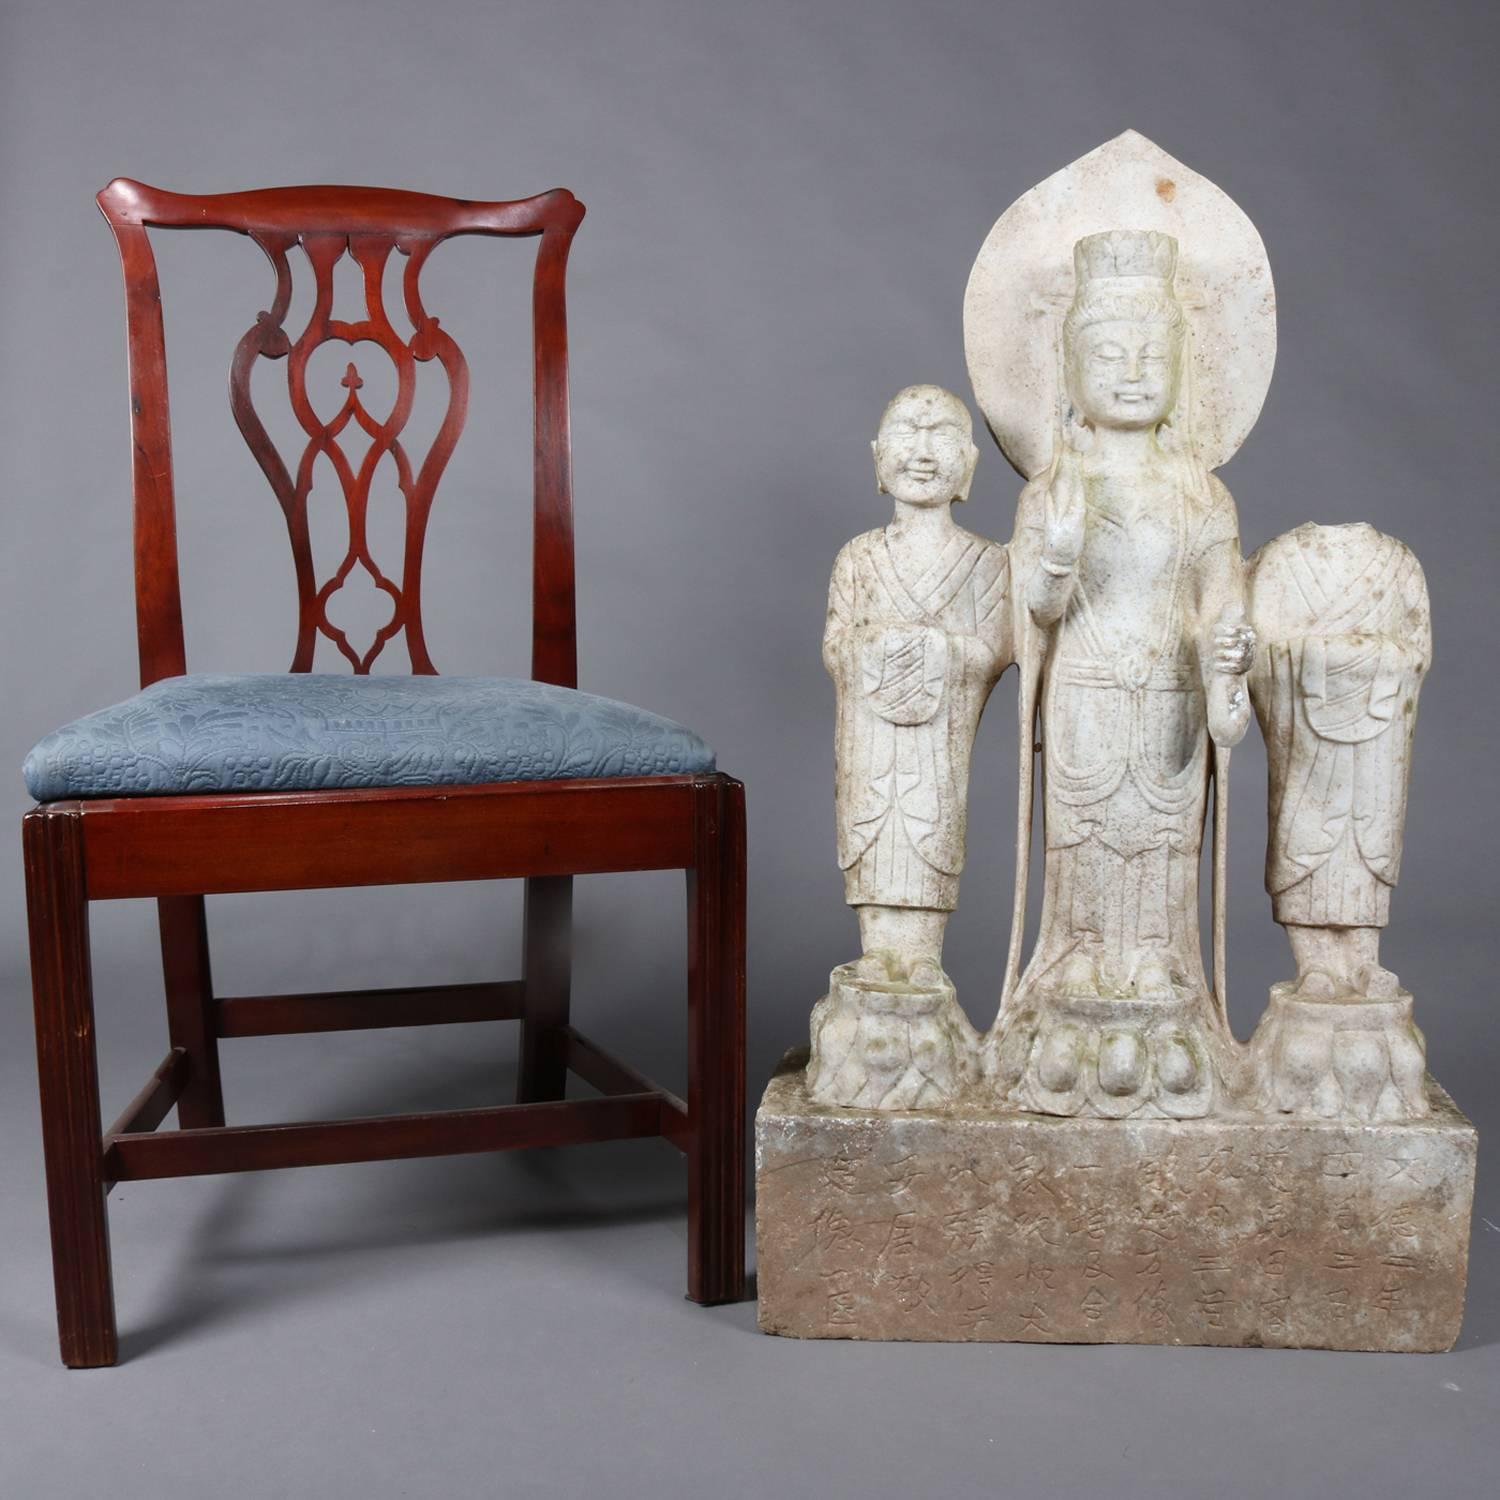 Antique Asian carved marble sculpture features three standing Buddhas on rectangular plinth, outdoor garden statues, 19th century

Measures: 36